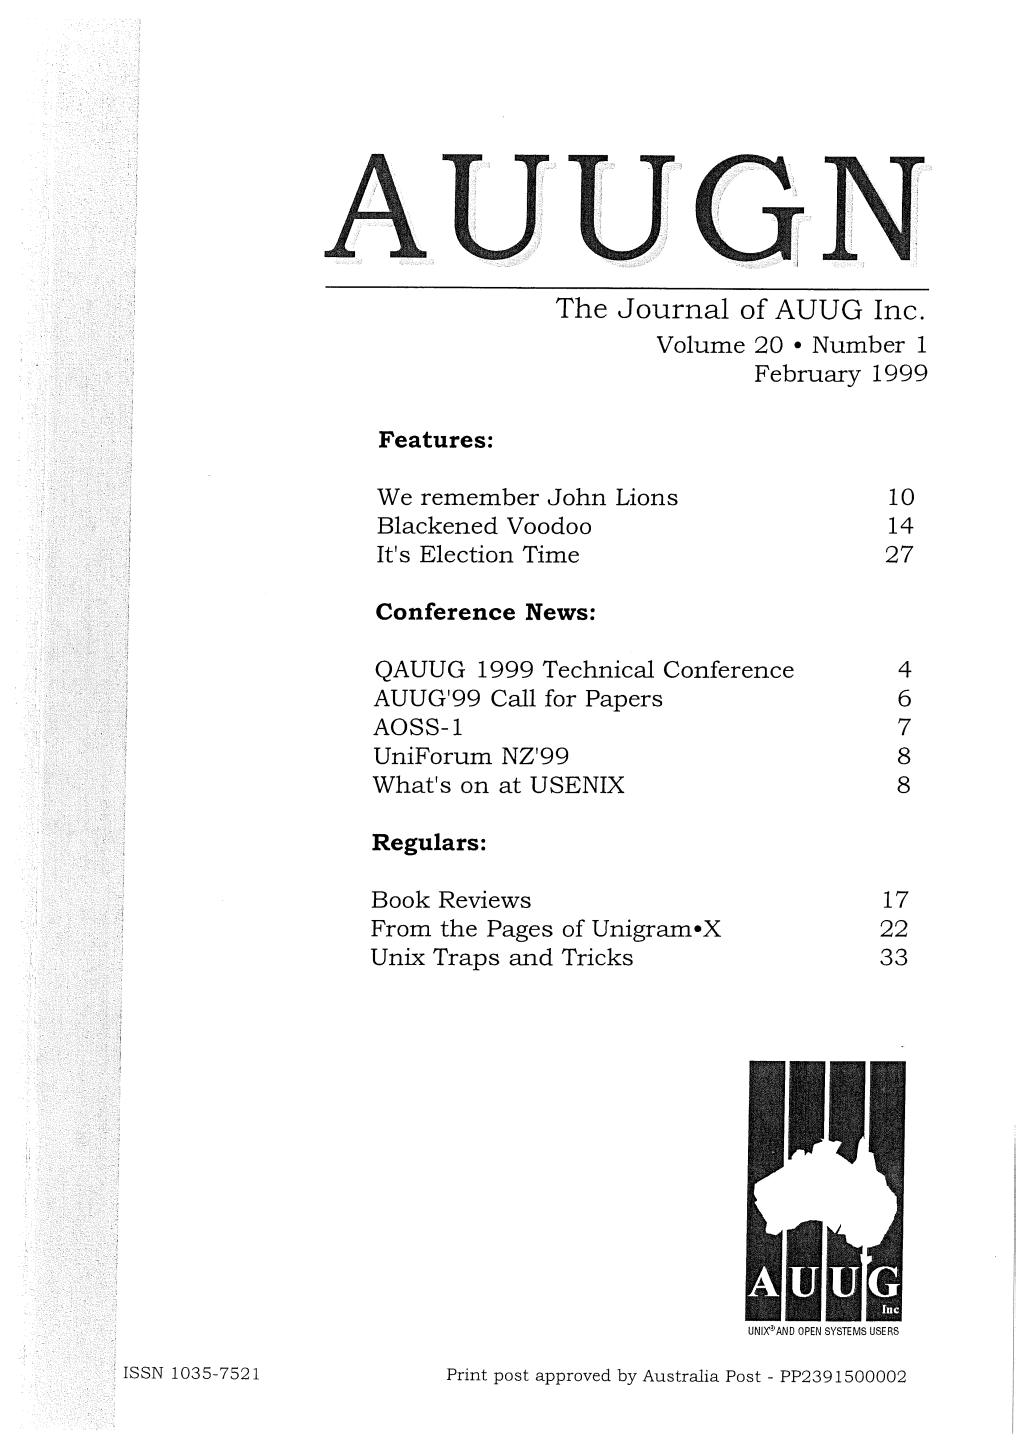 The Journal of AUUG Inc. Volume 20 ¯ Number 1 February 1999